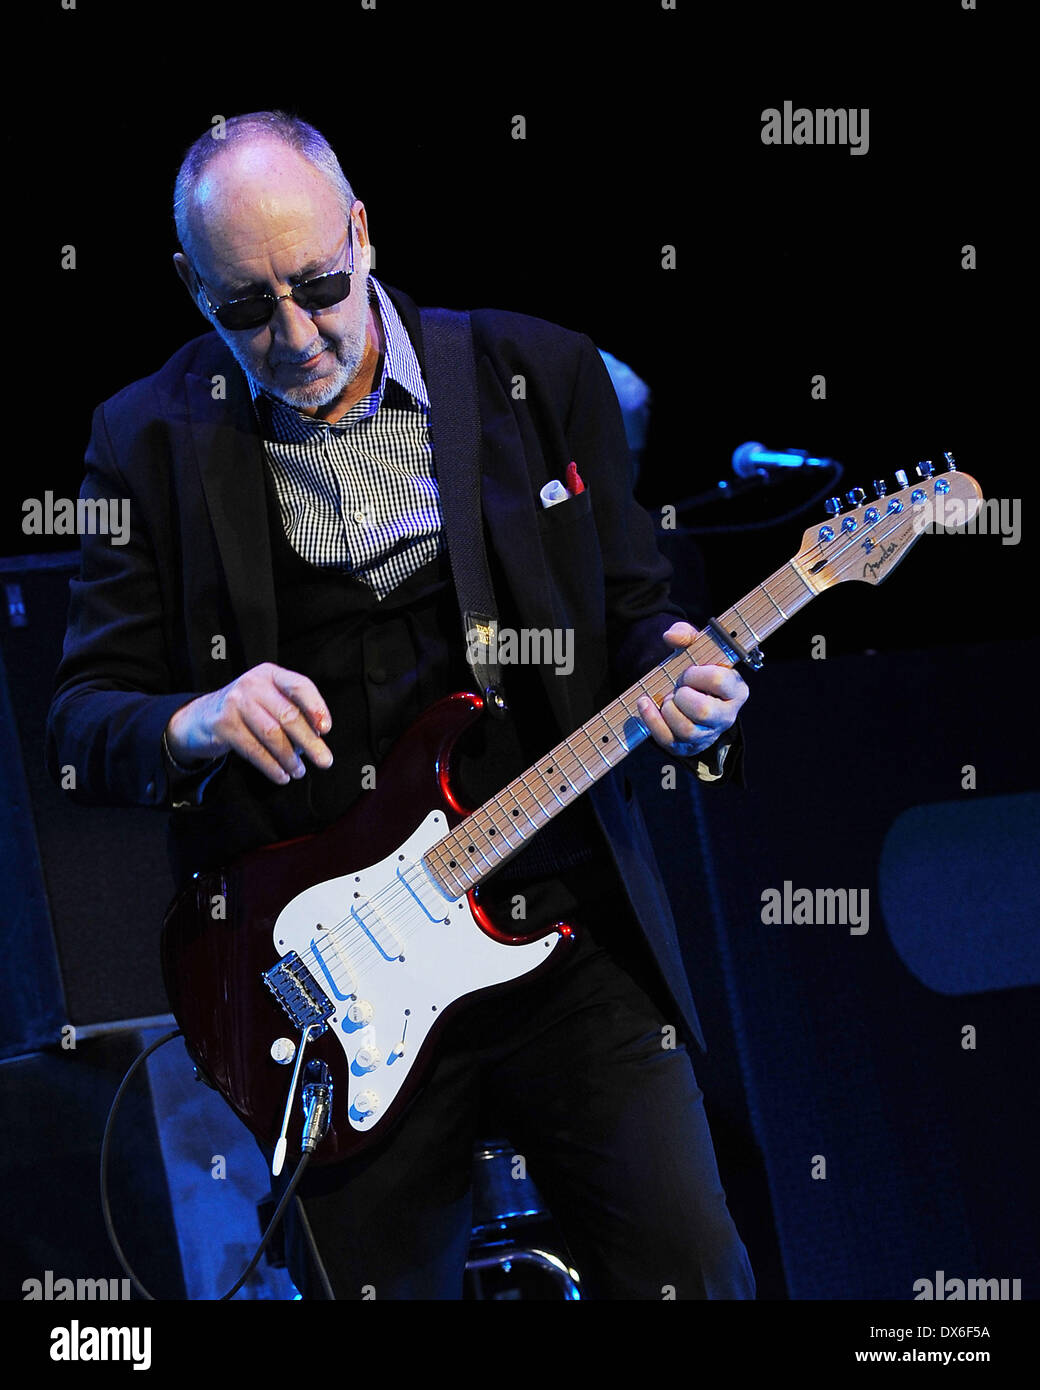 Pete Townshend The Who performs on opening night of the Quadrophenia Tour Lauderdale, Florida - 01.11.12 Featuring: Pete Townsh Stock Photo